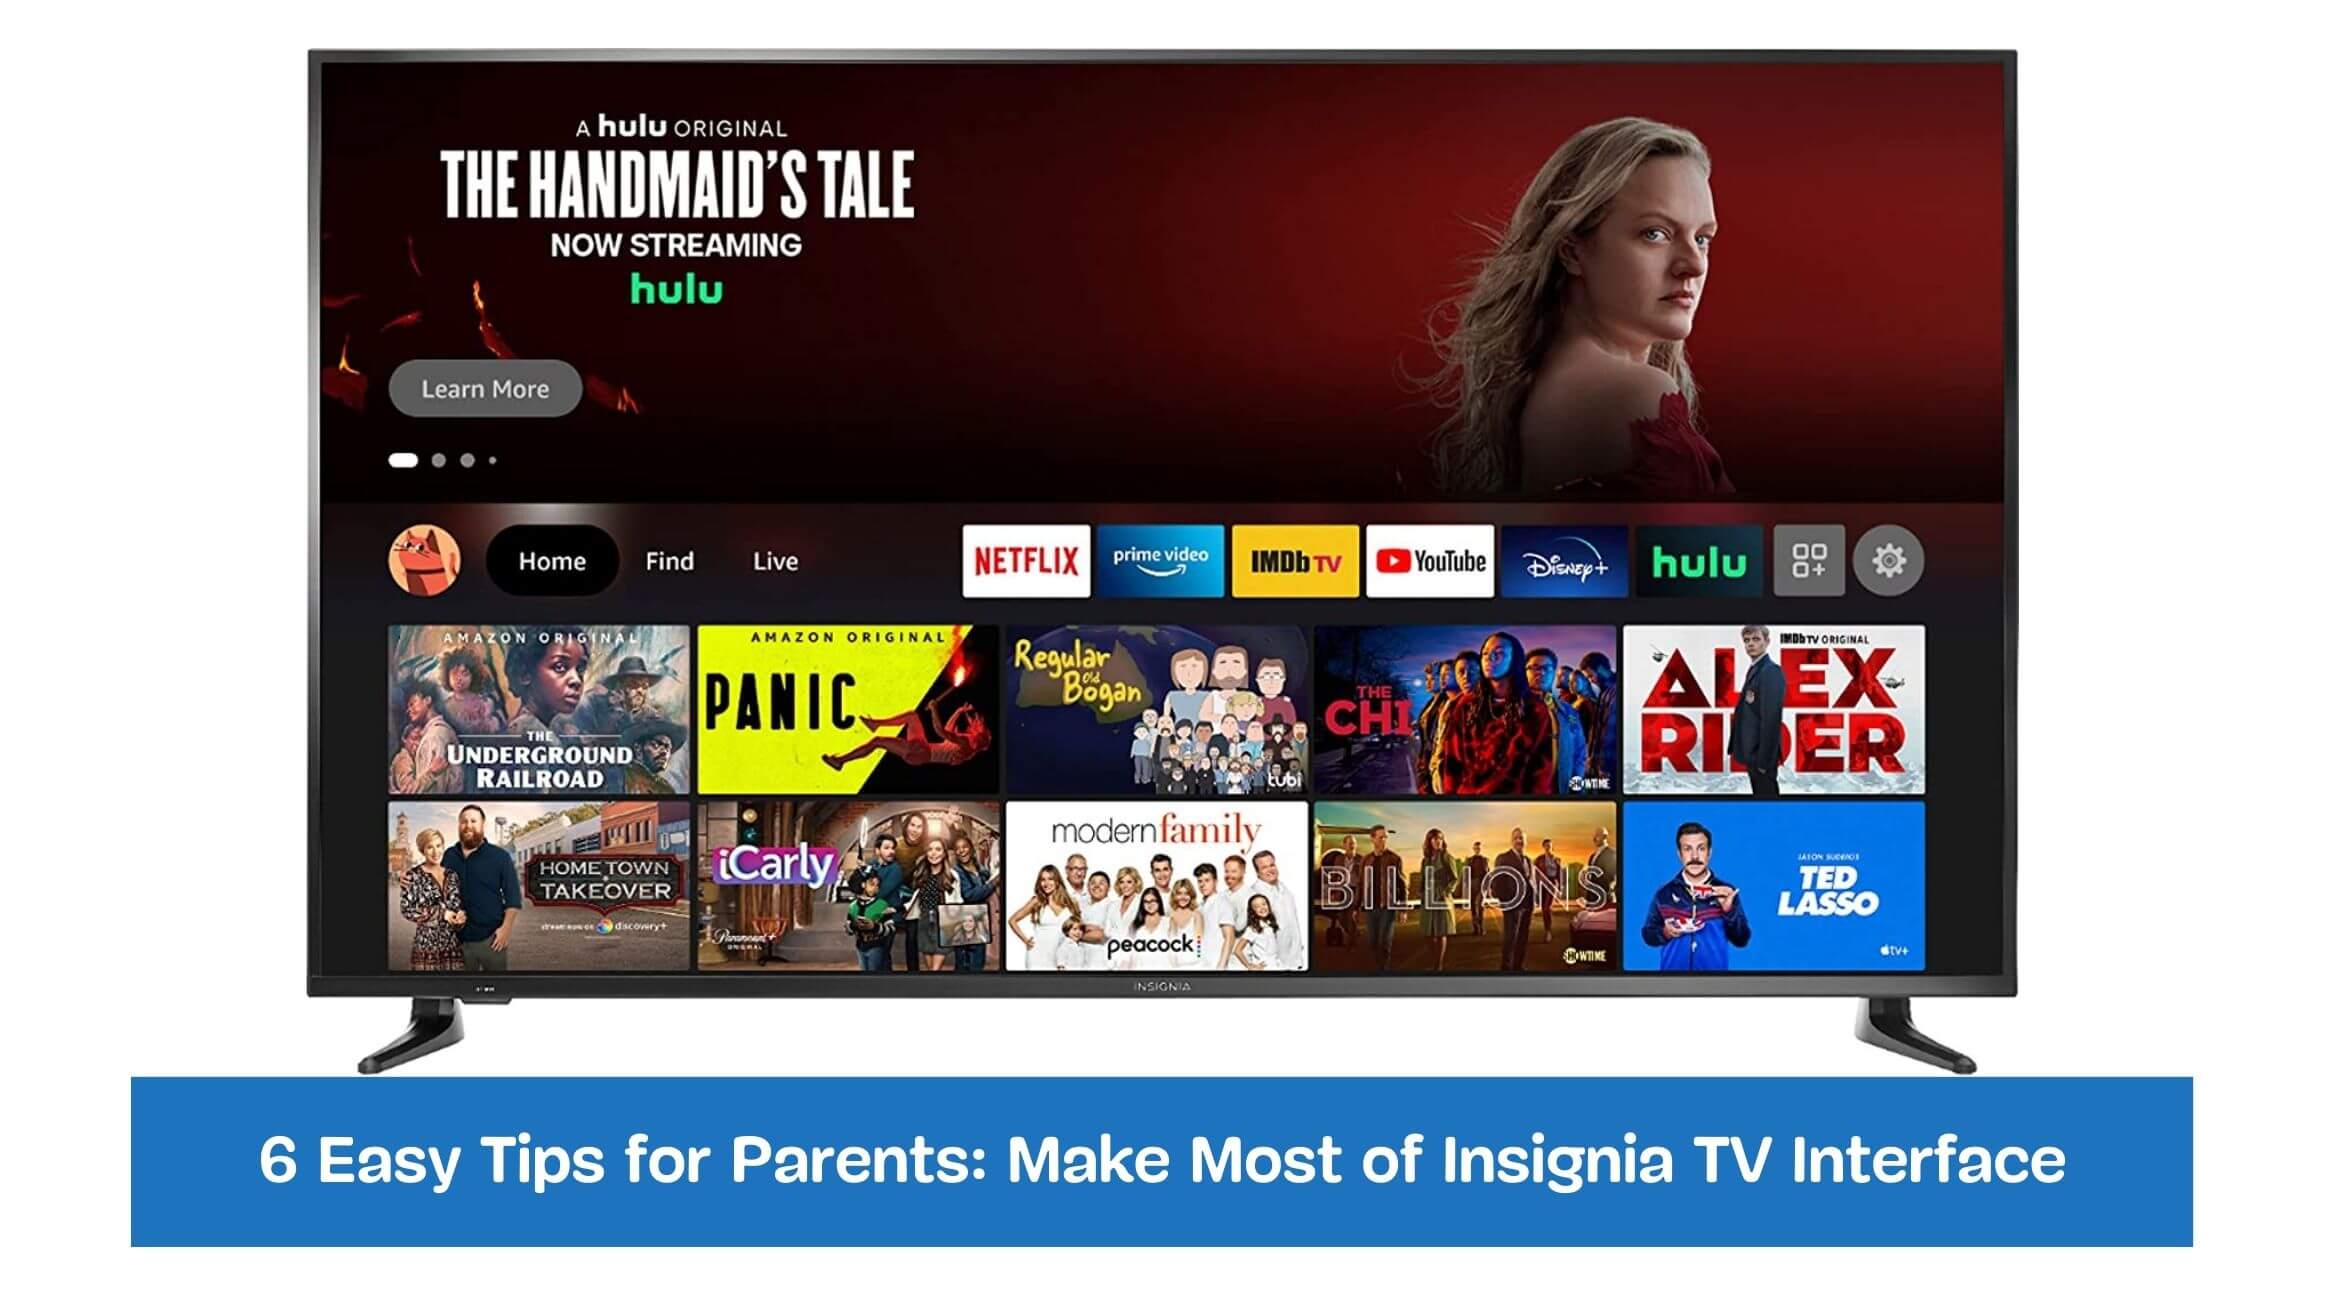 6 Easy Tips for Parents: Make Most of Insignia TV Interface